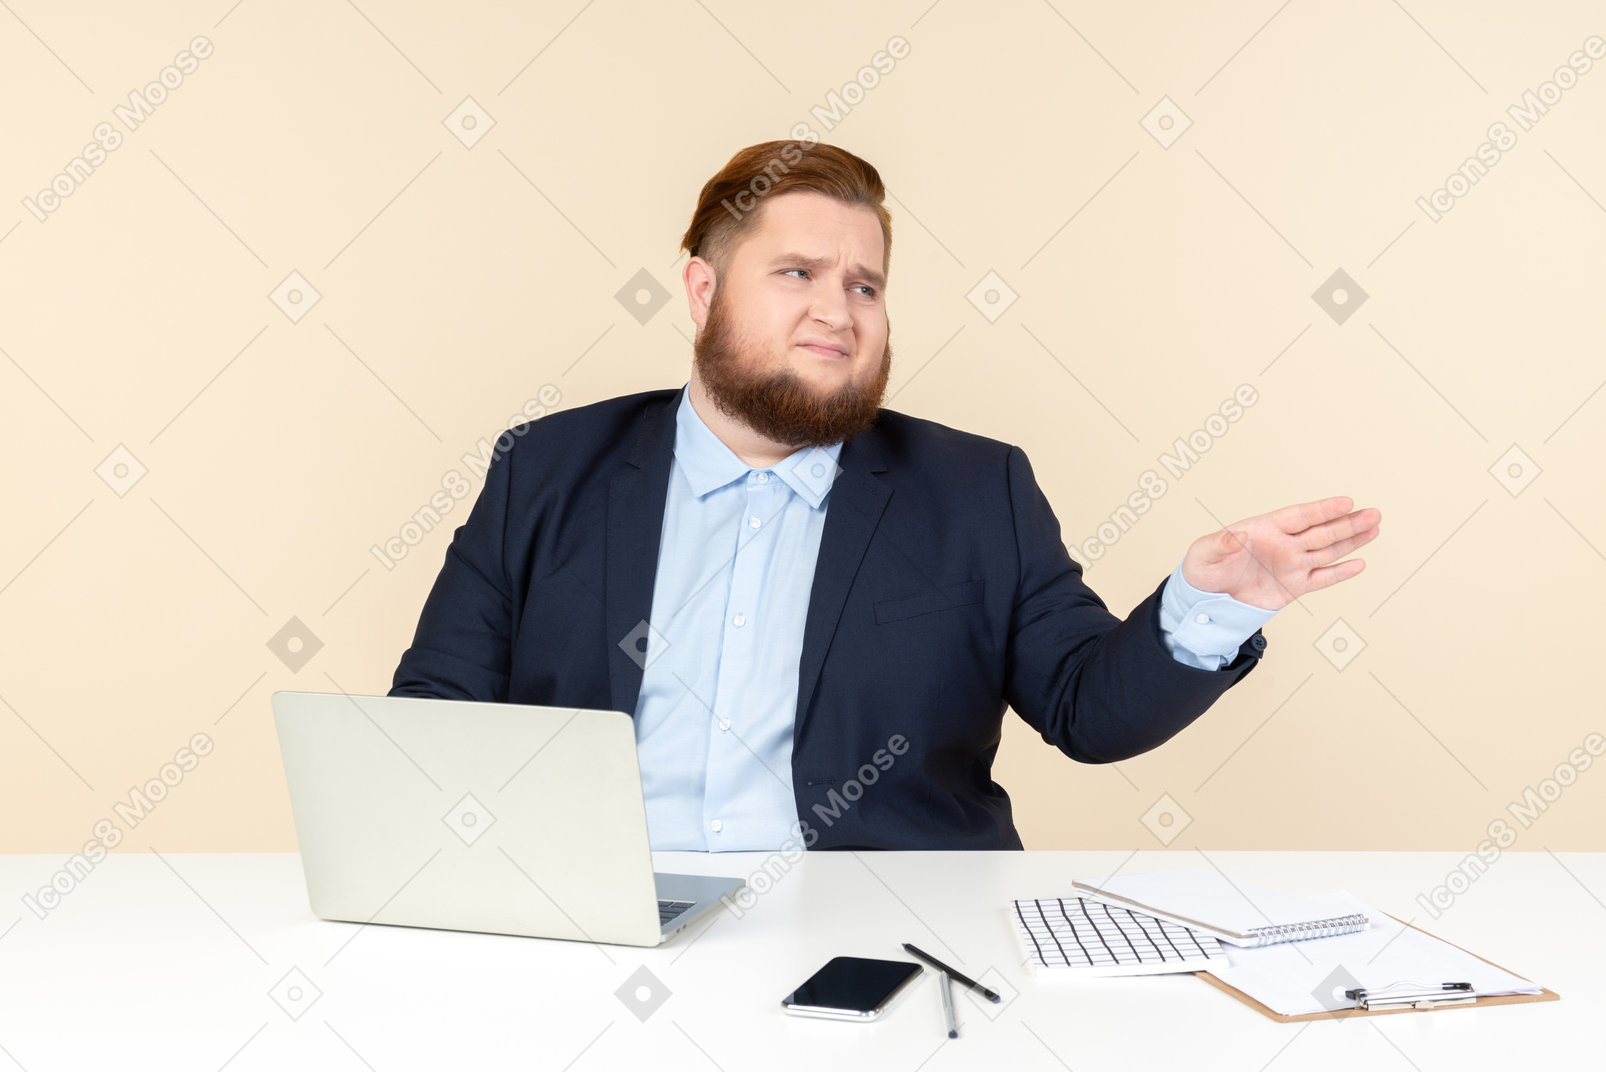 Not worried about anything young overweight office worker sitting at the office desk